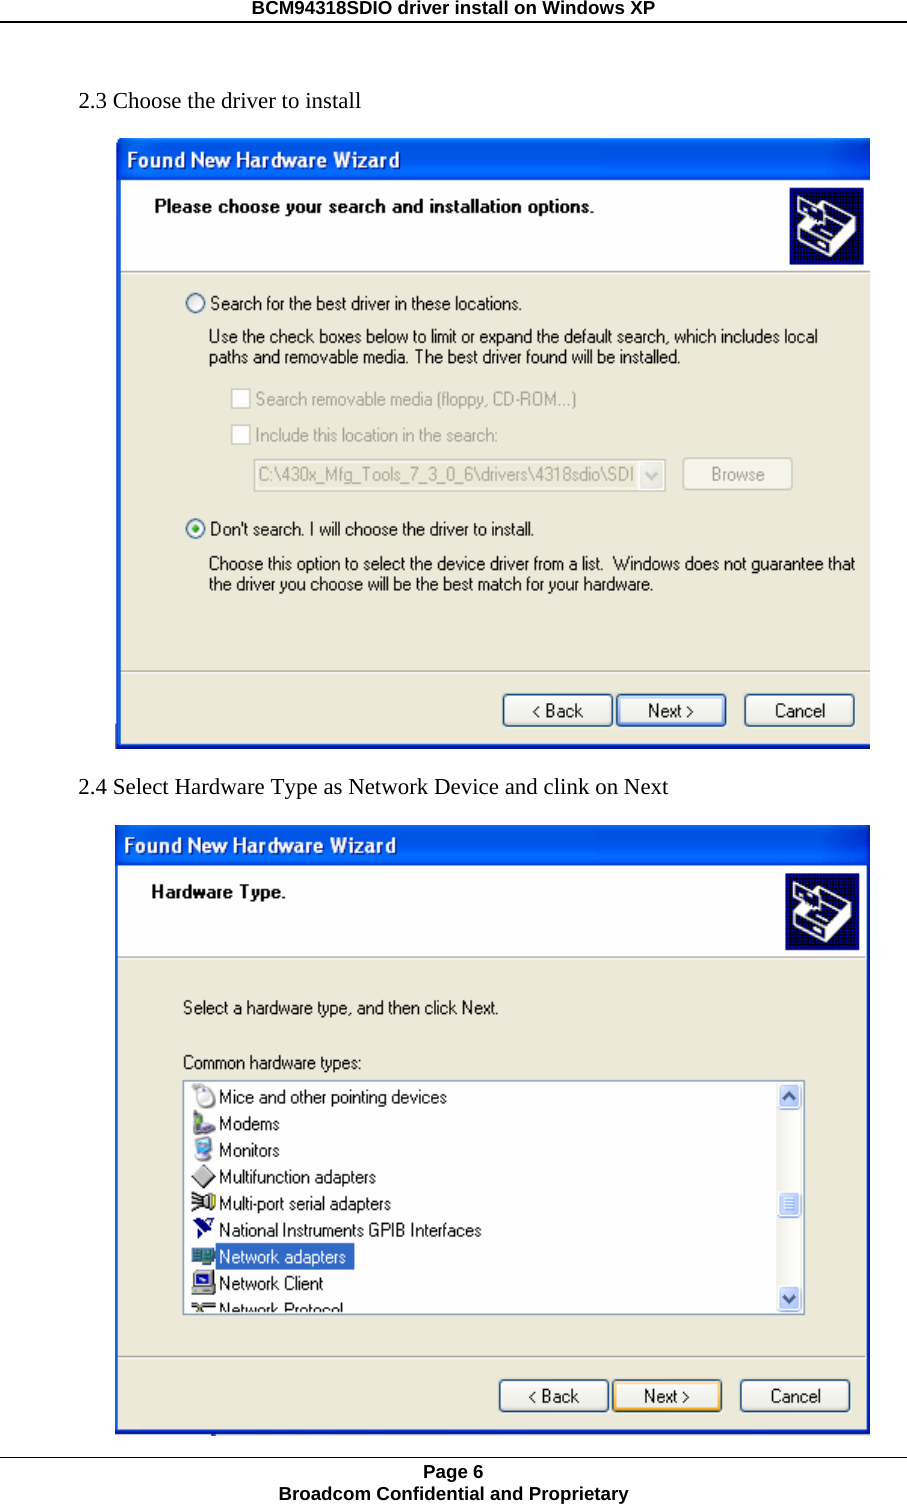 BCM94318SDIO driver install on Windows XP 2.3 Choose the driver to install   2.4 Select Hardware Type as Network Device and clink on Next   Page 6 Broadcom Confidential and Proprietary  